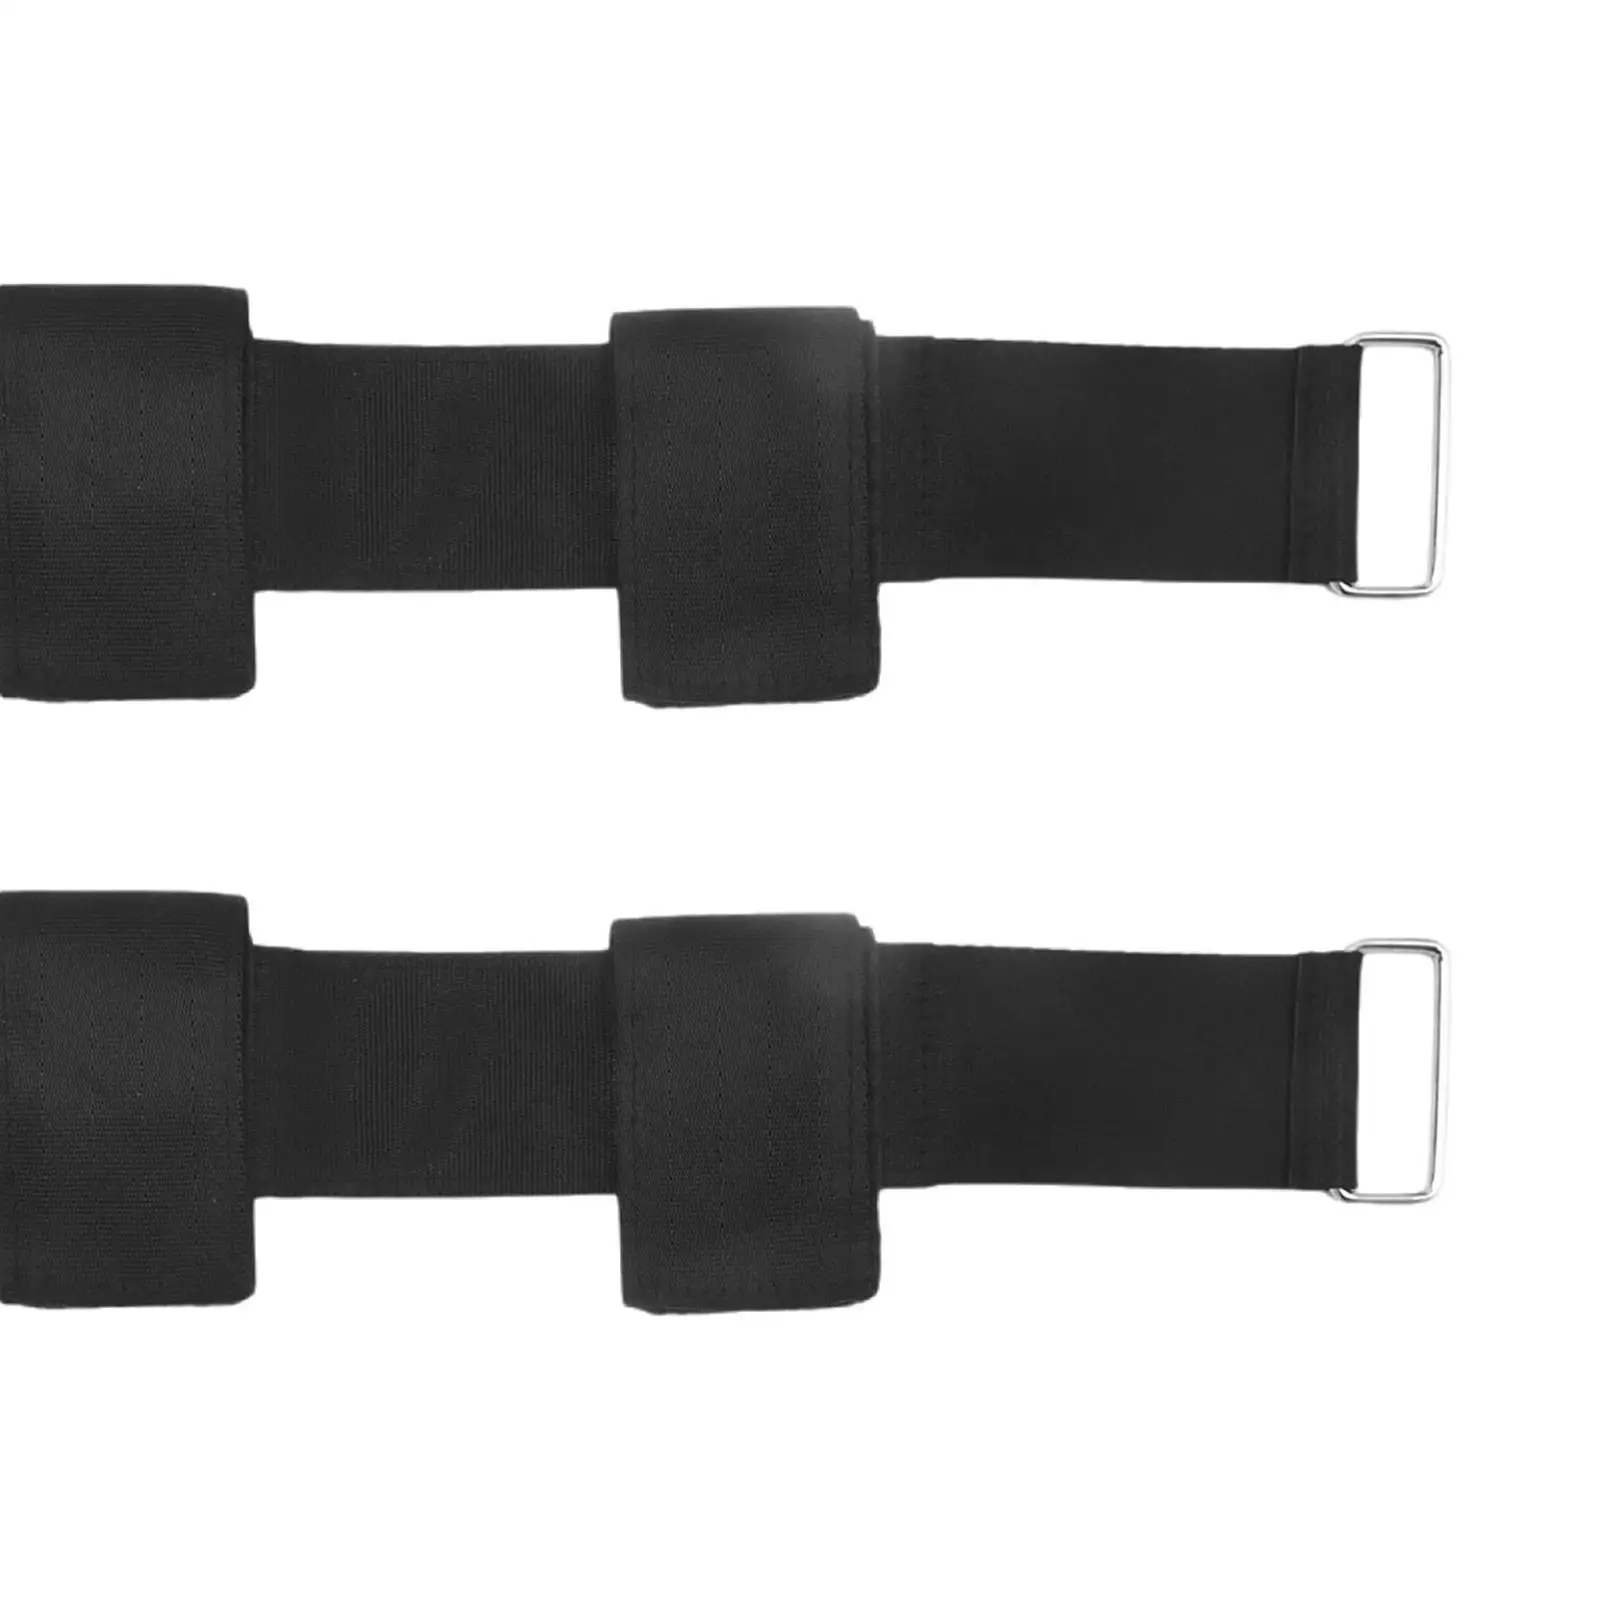 2 Pieces Dumbbell Foot Straps, Tibialis Trainer Strap, Dumbbell Attachment for Feet